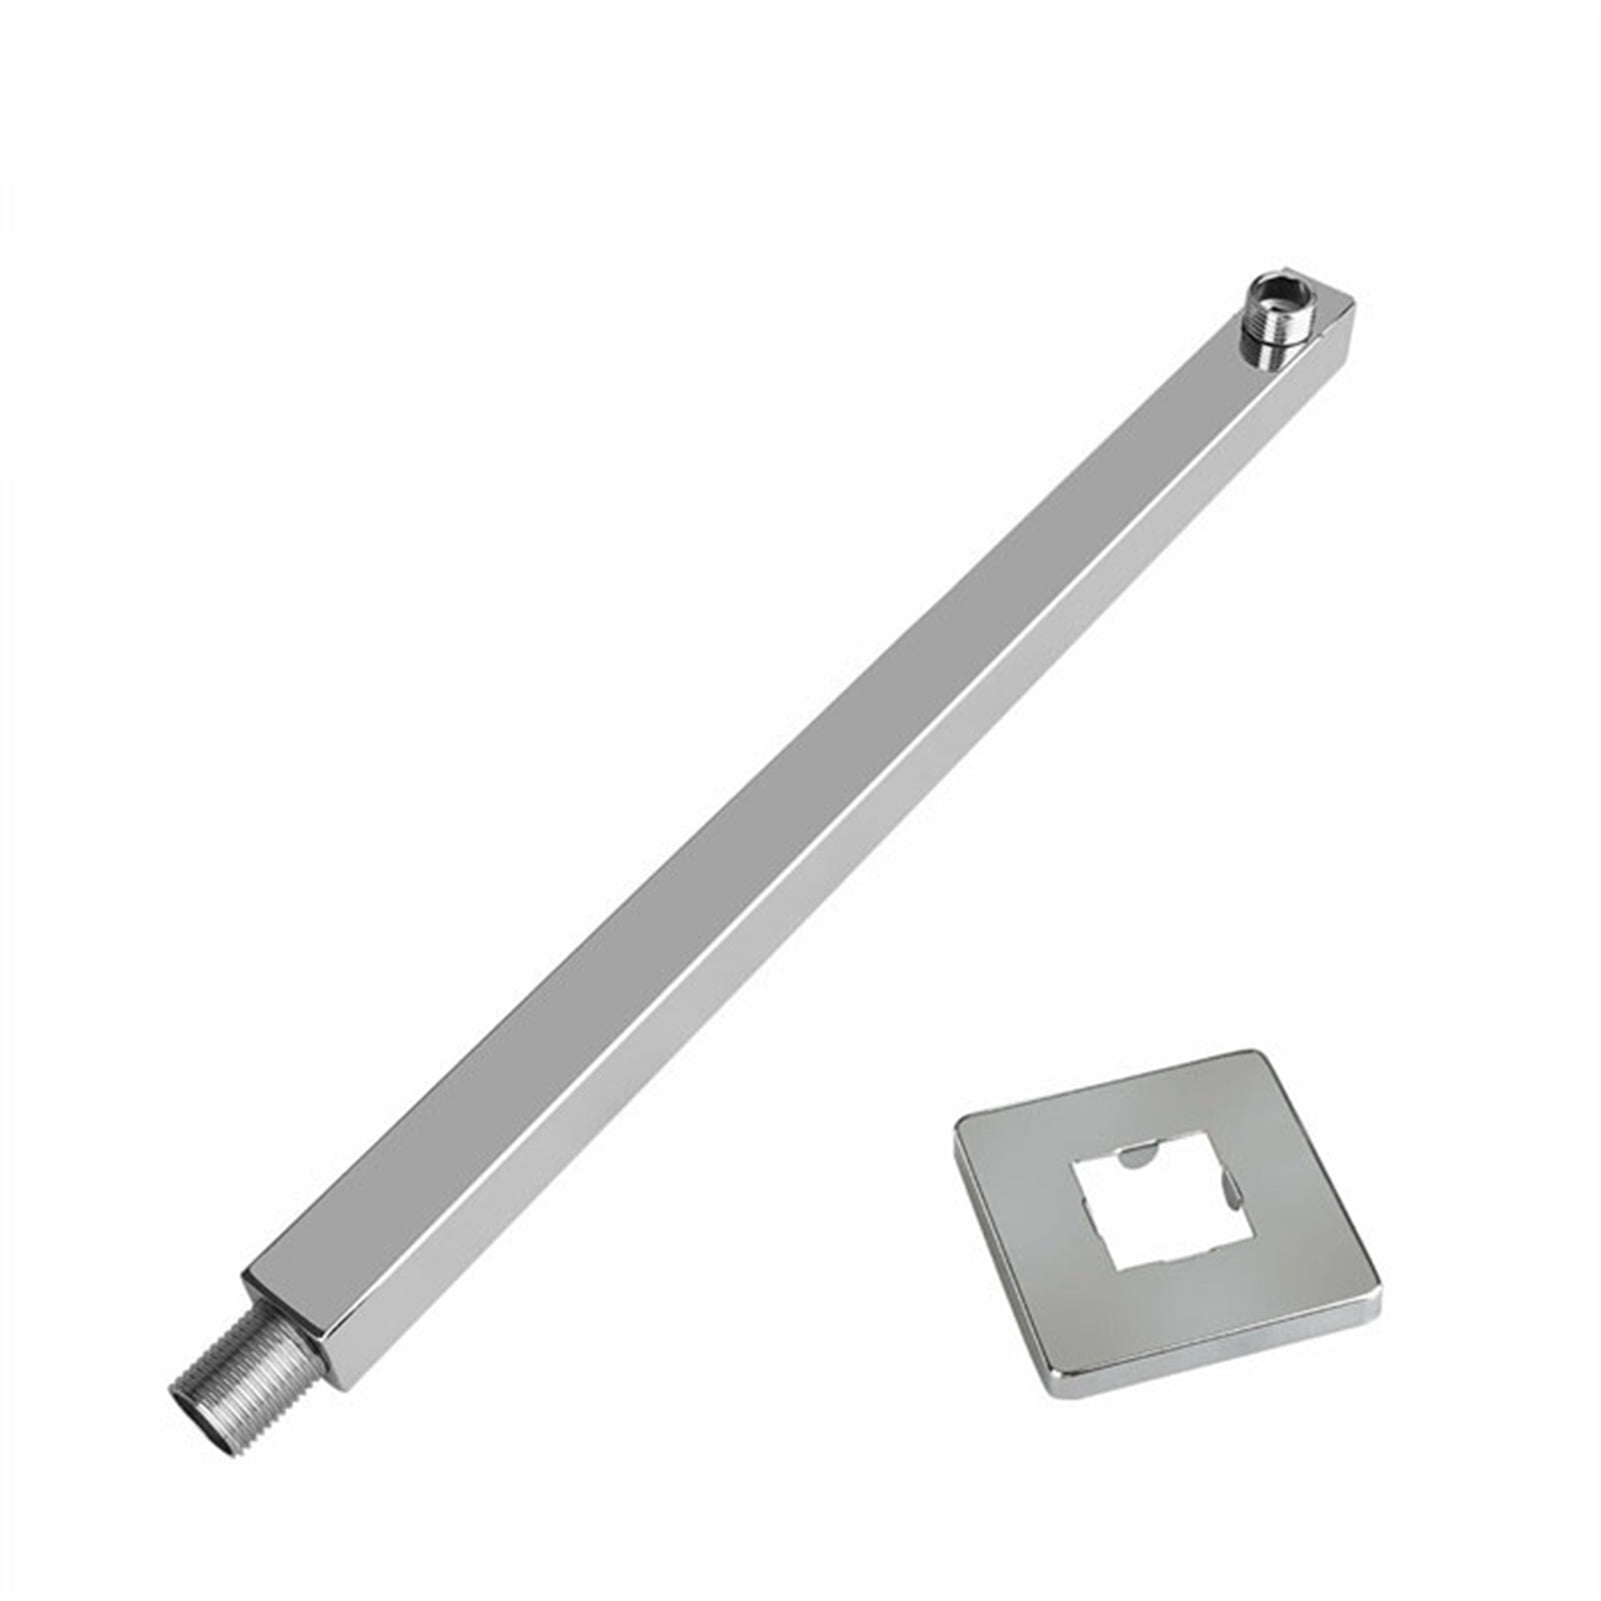 16-inch Wall Mounted Stainless Steel Square Rainfall Shower Head Extension Arm 